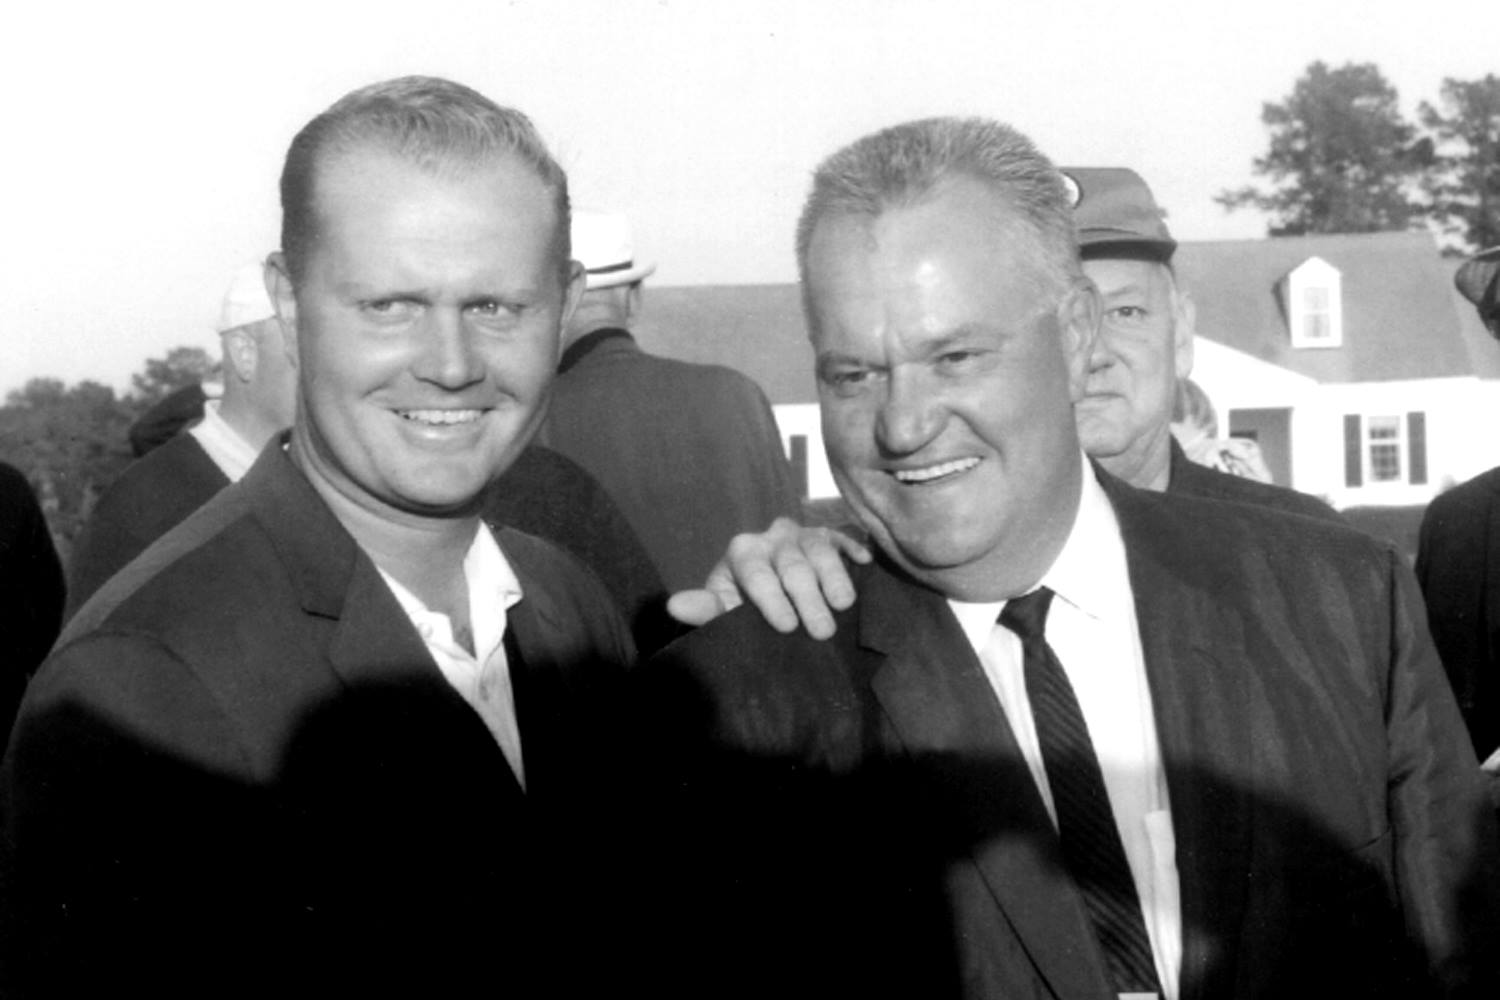 Jack and Charlie Nicklaus